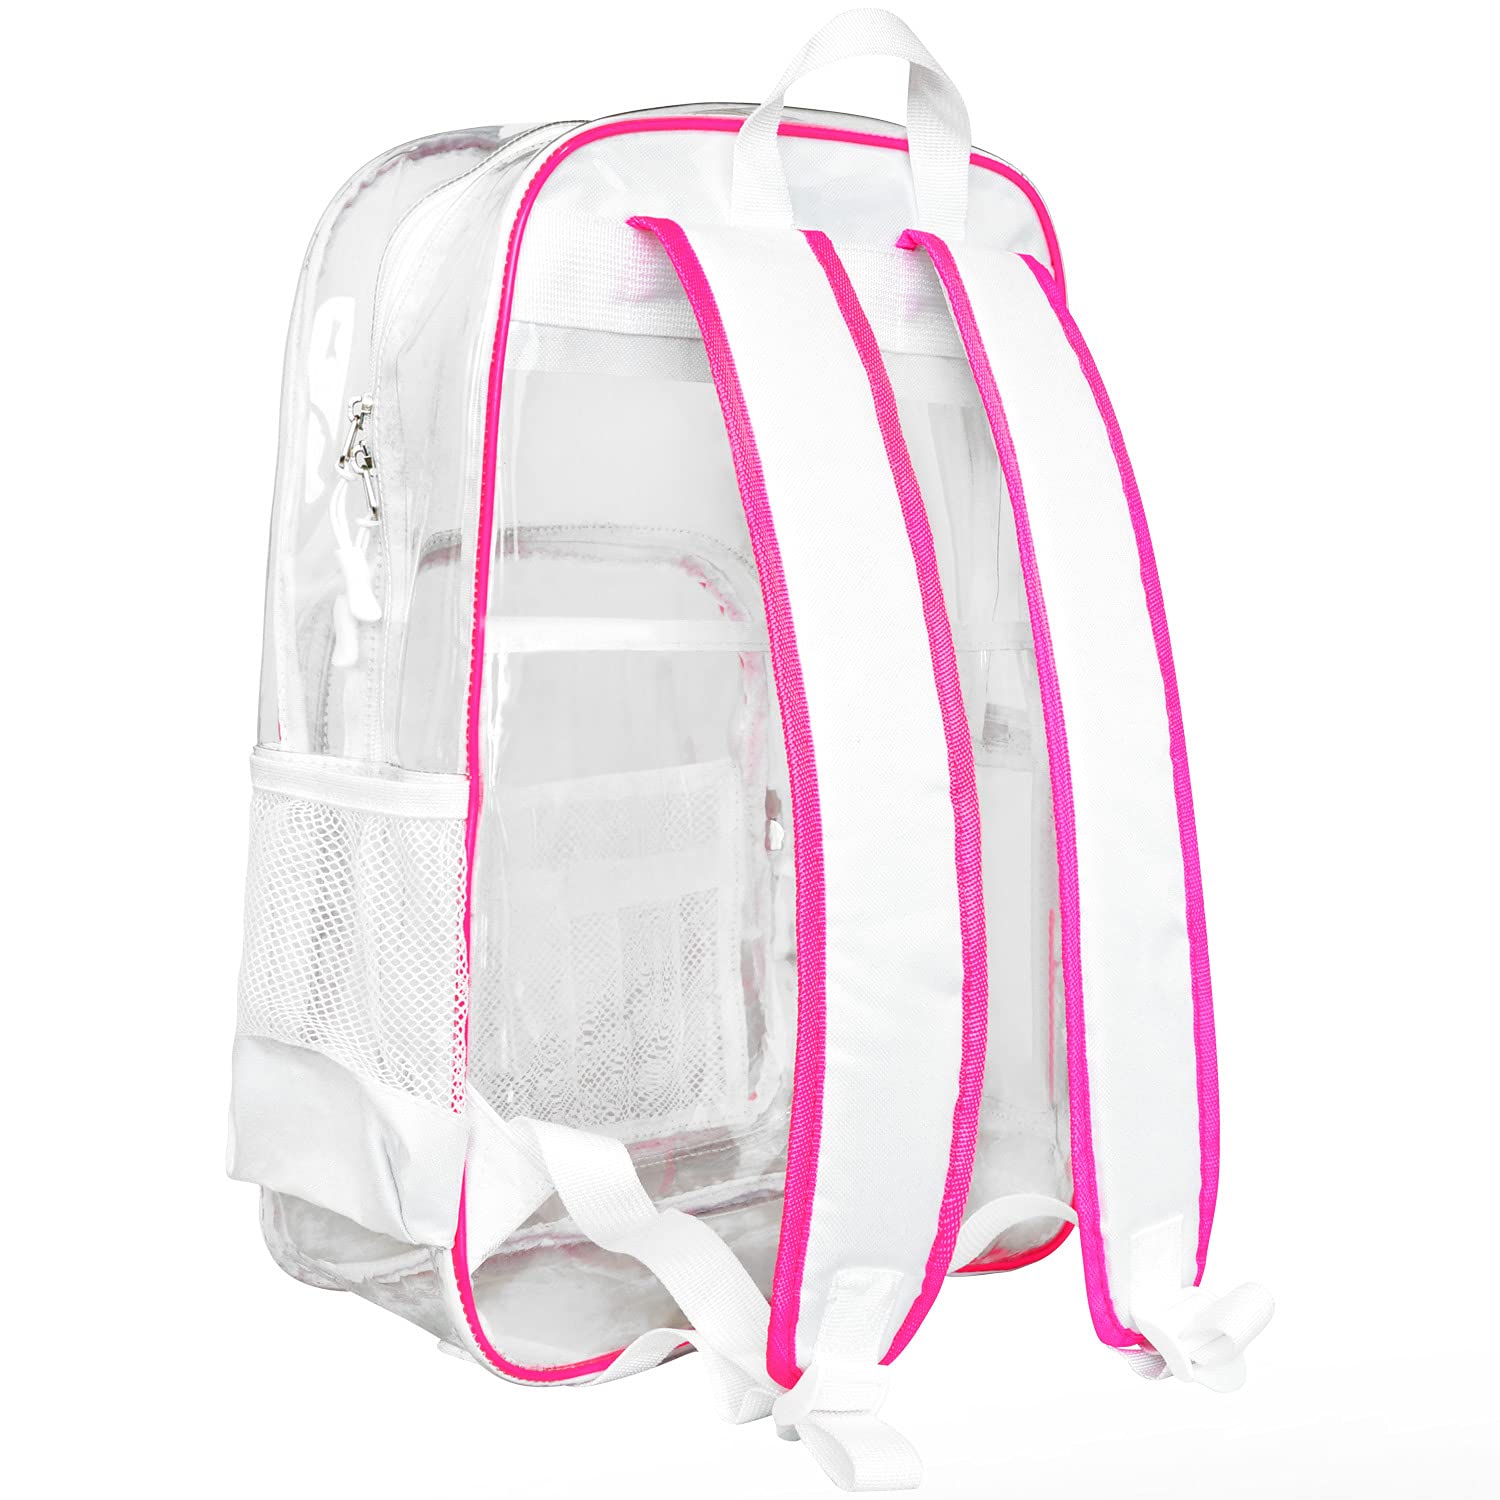 Meister All-Access Clear Backpack - Meets School & Event Security Bag Requirements - Pink / White